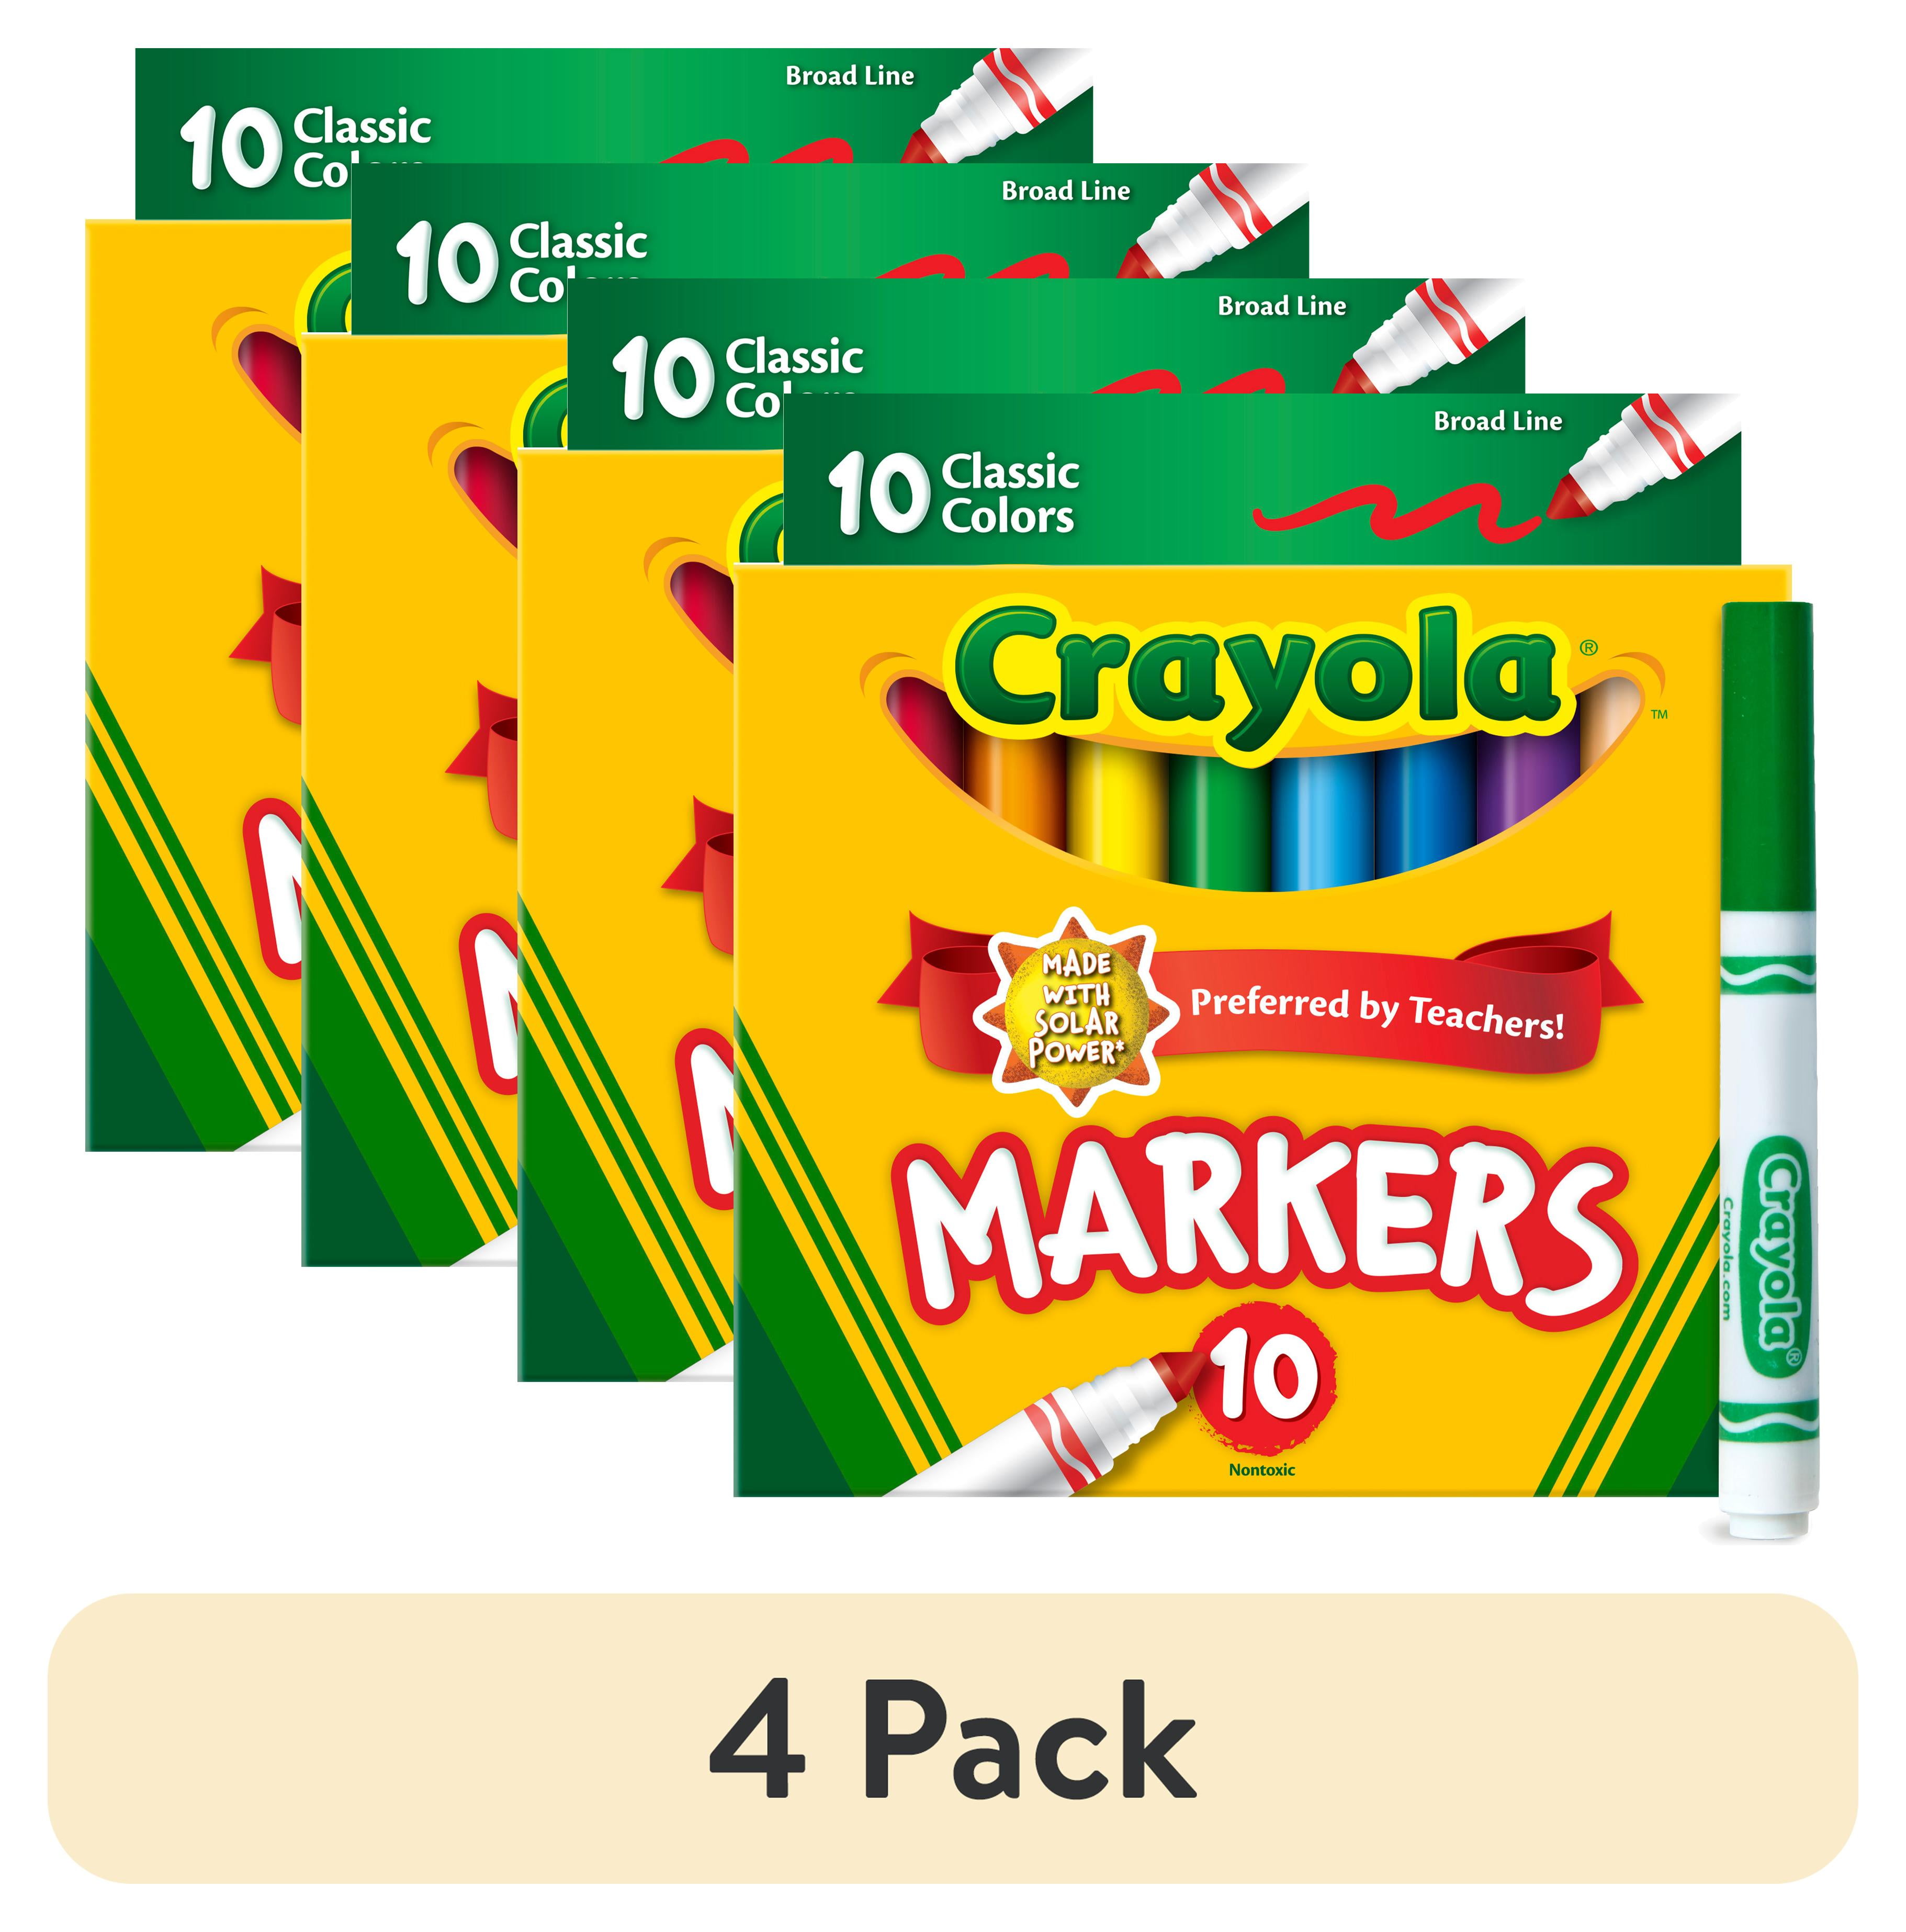 Crayola Broad Line Markers - Green (12ct), Markers for Kids, Bulk School  Supplies for Teachers, Nontoxic, Marker Refill with Reusable Box